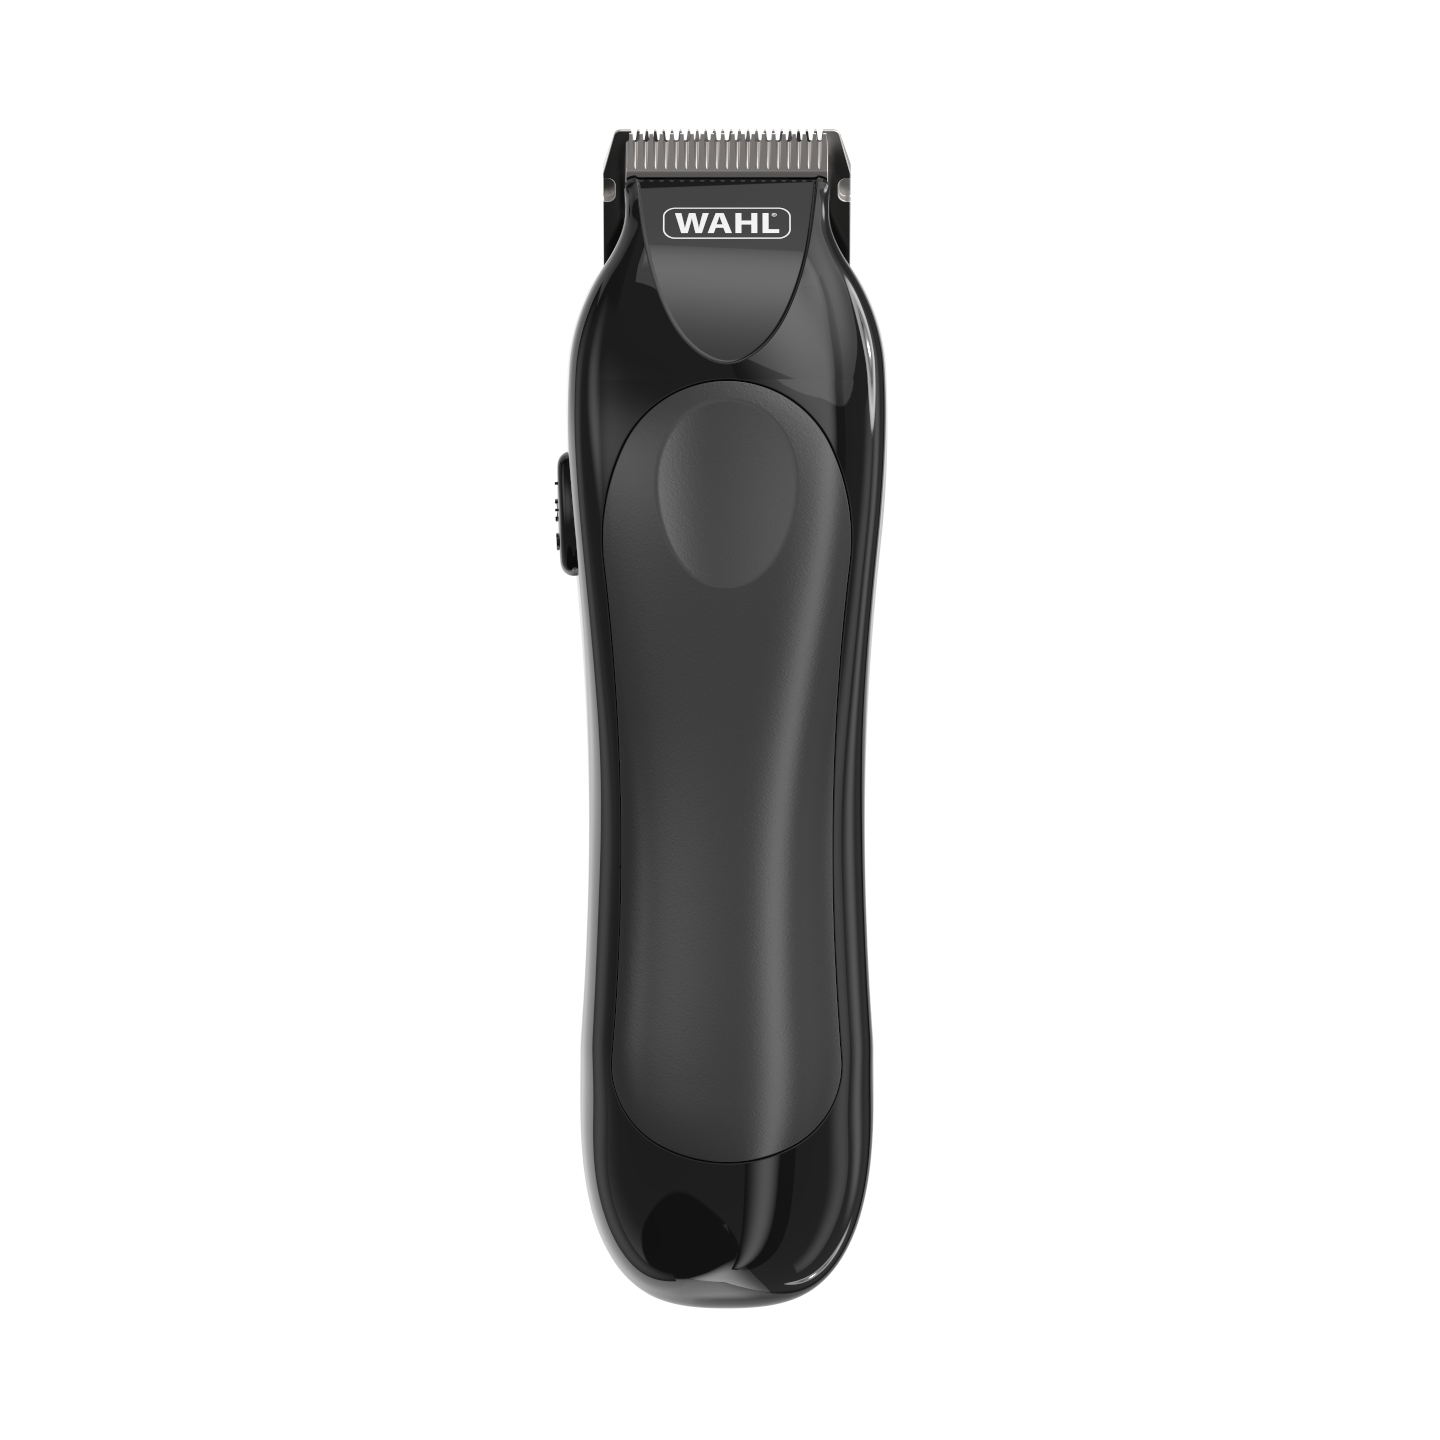 mini trimmer wahl